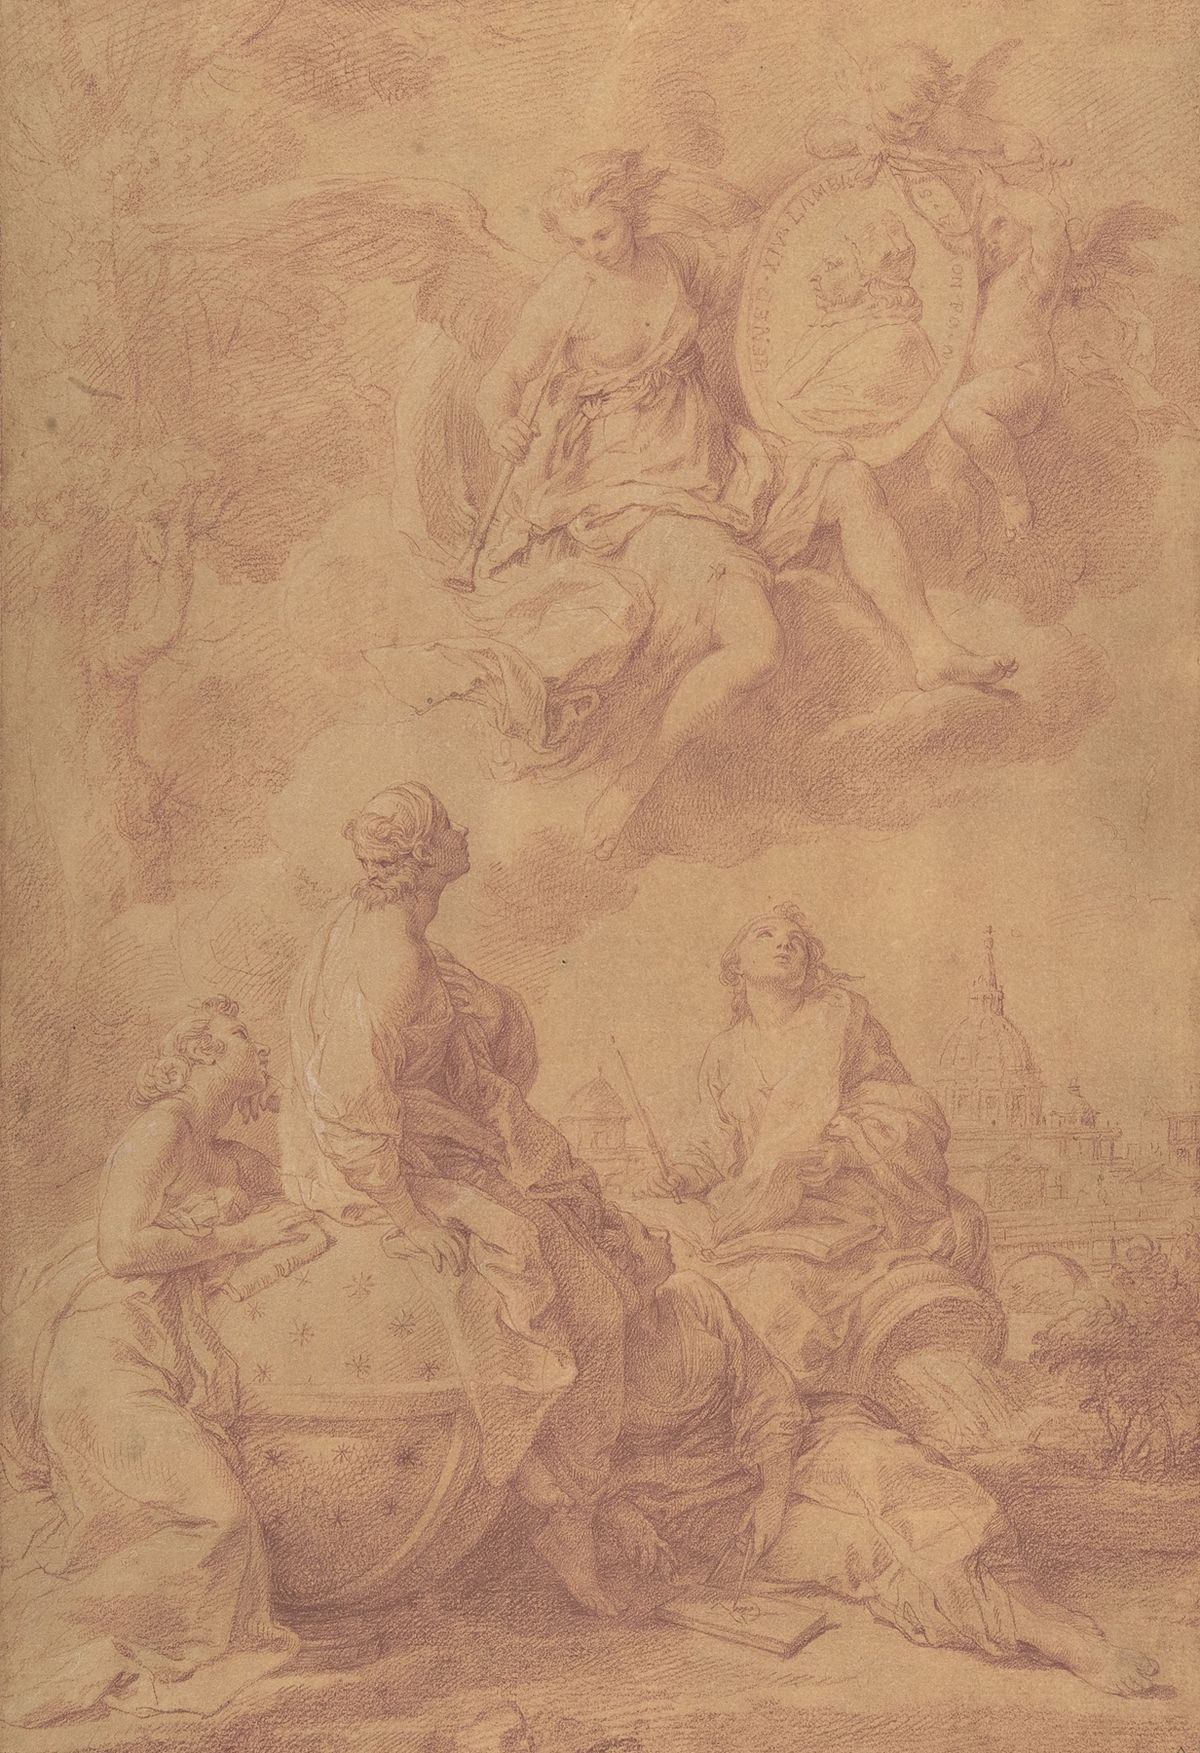 Allegory in Honor of Pope Benedict XIV (ca. 1745) by Pompeo Batoni - Public Domain Catholic Drawing